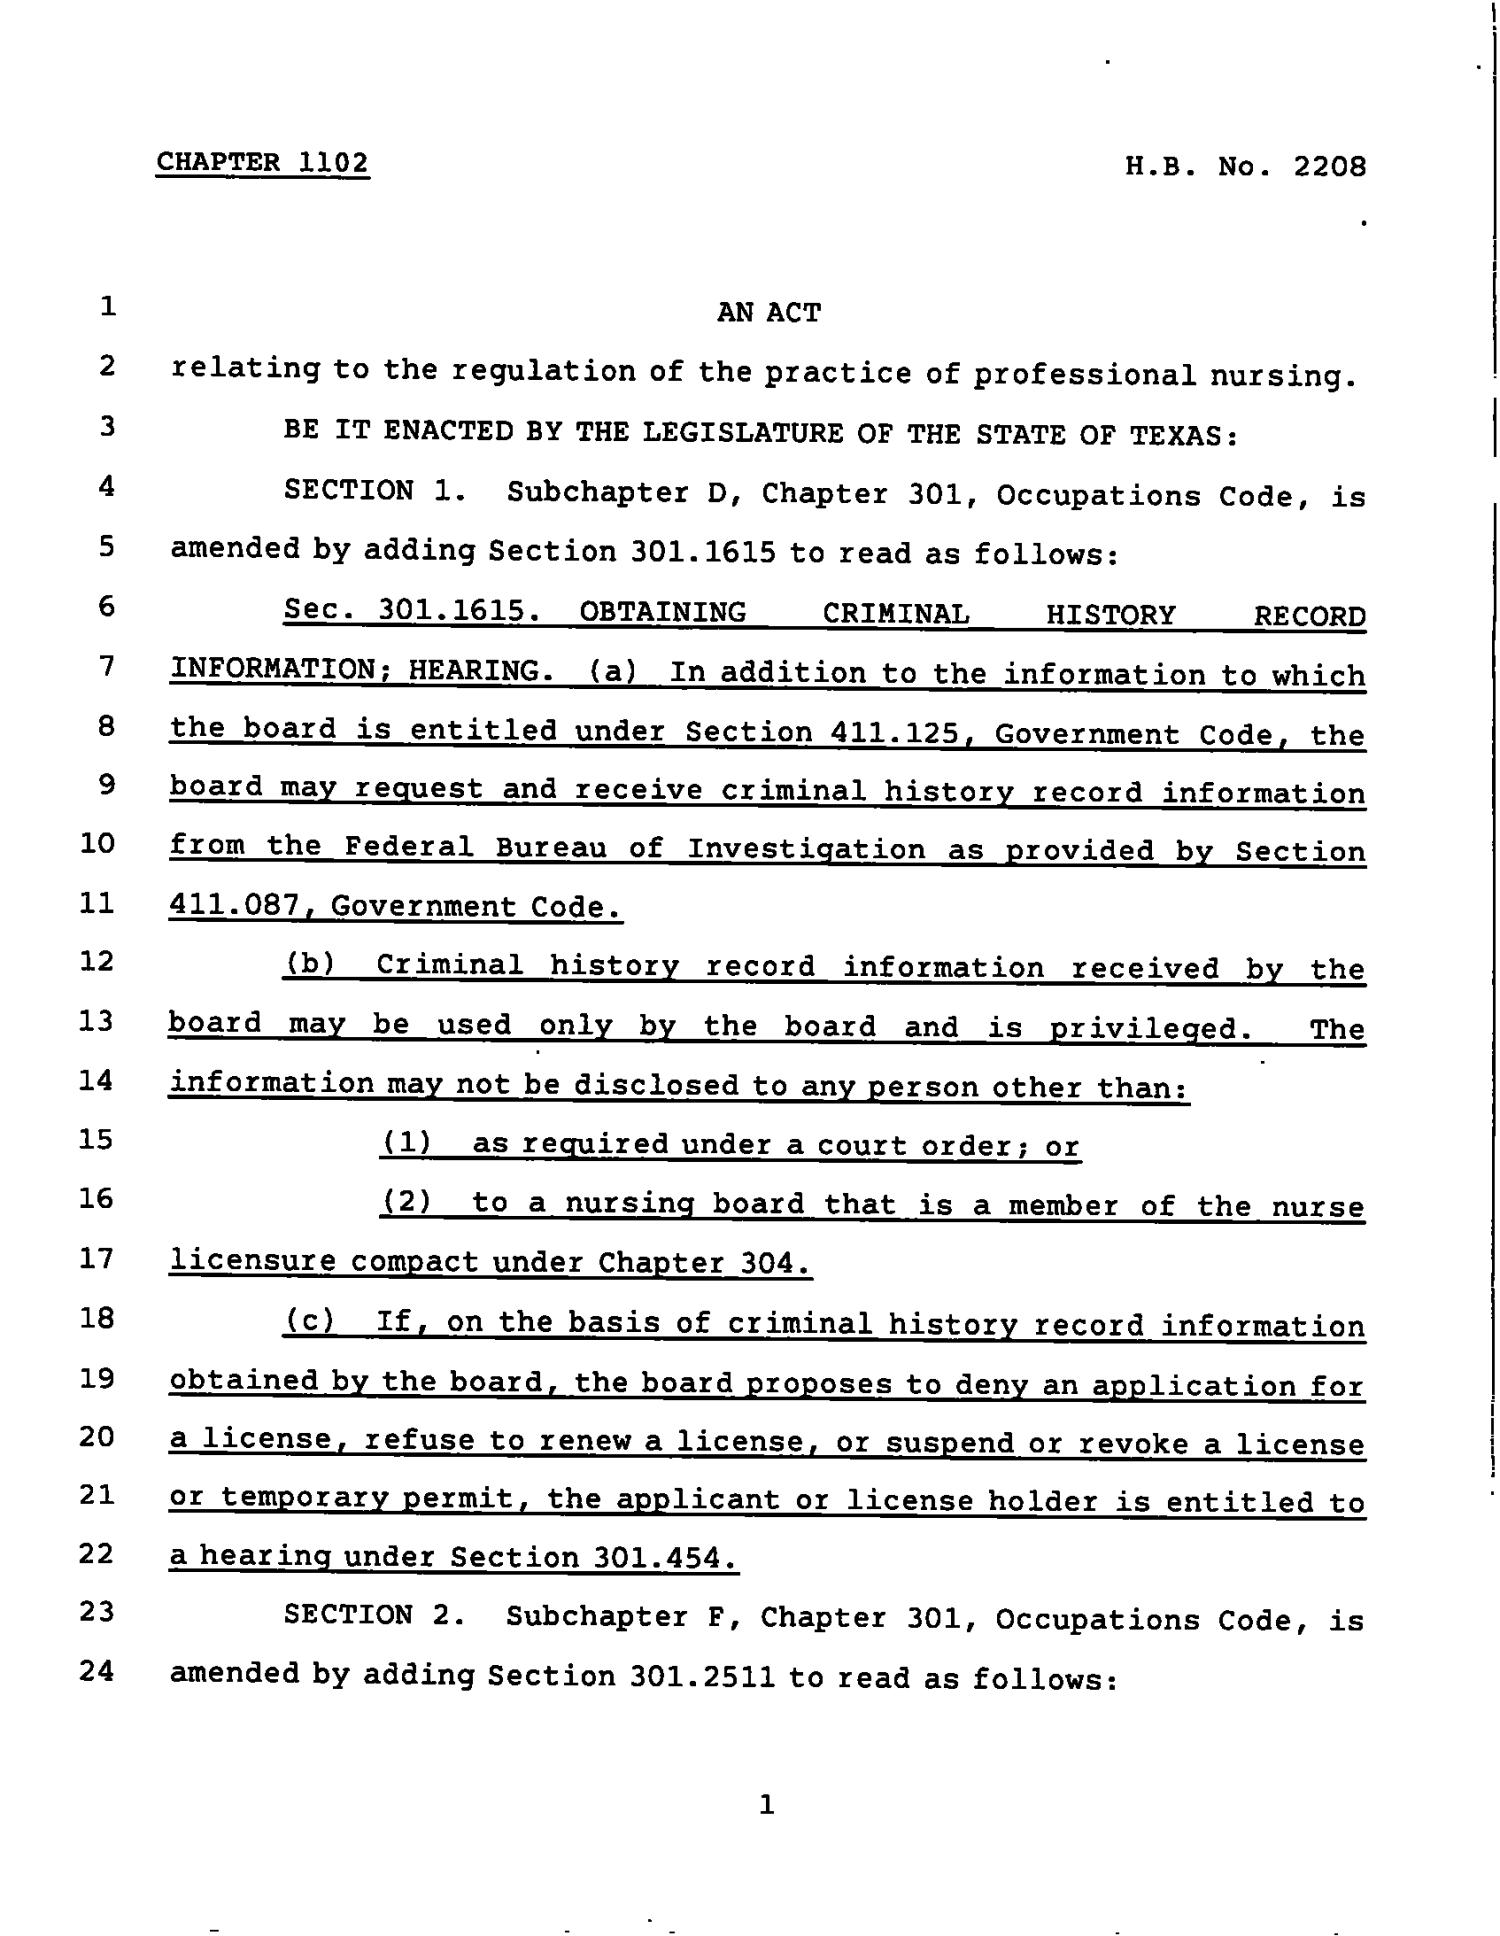 78th Texas Legislature, Regular Session, House Bill 2208, Chapter 1102
                                                
                                                    [Sequence #]: 1 of 4
                                                